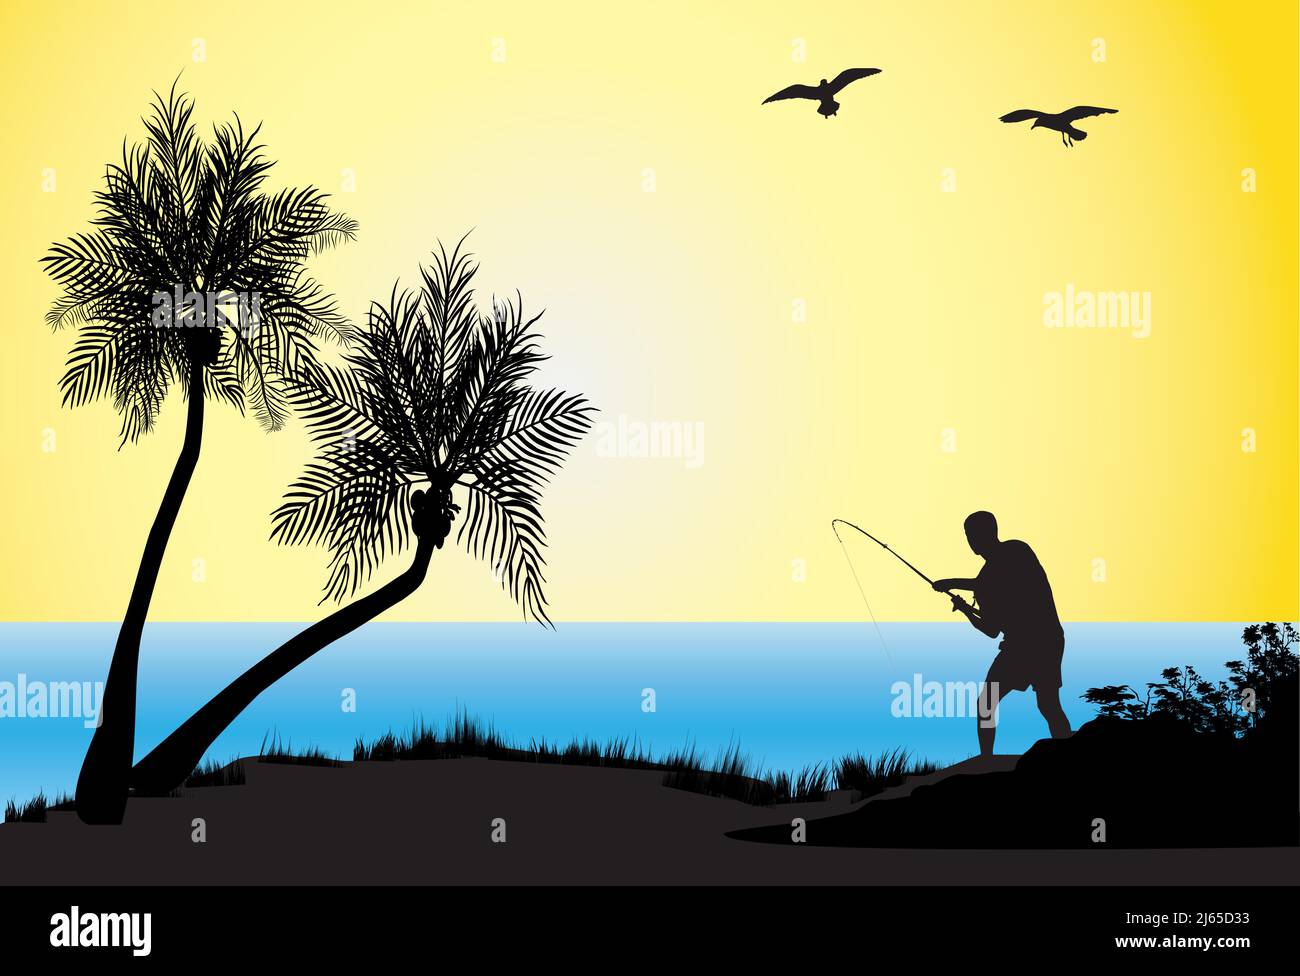 tropical scene of coconuts and man fishing as a silhouette Stock Vector